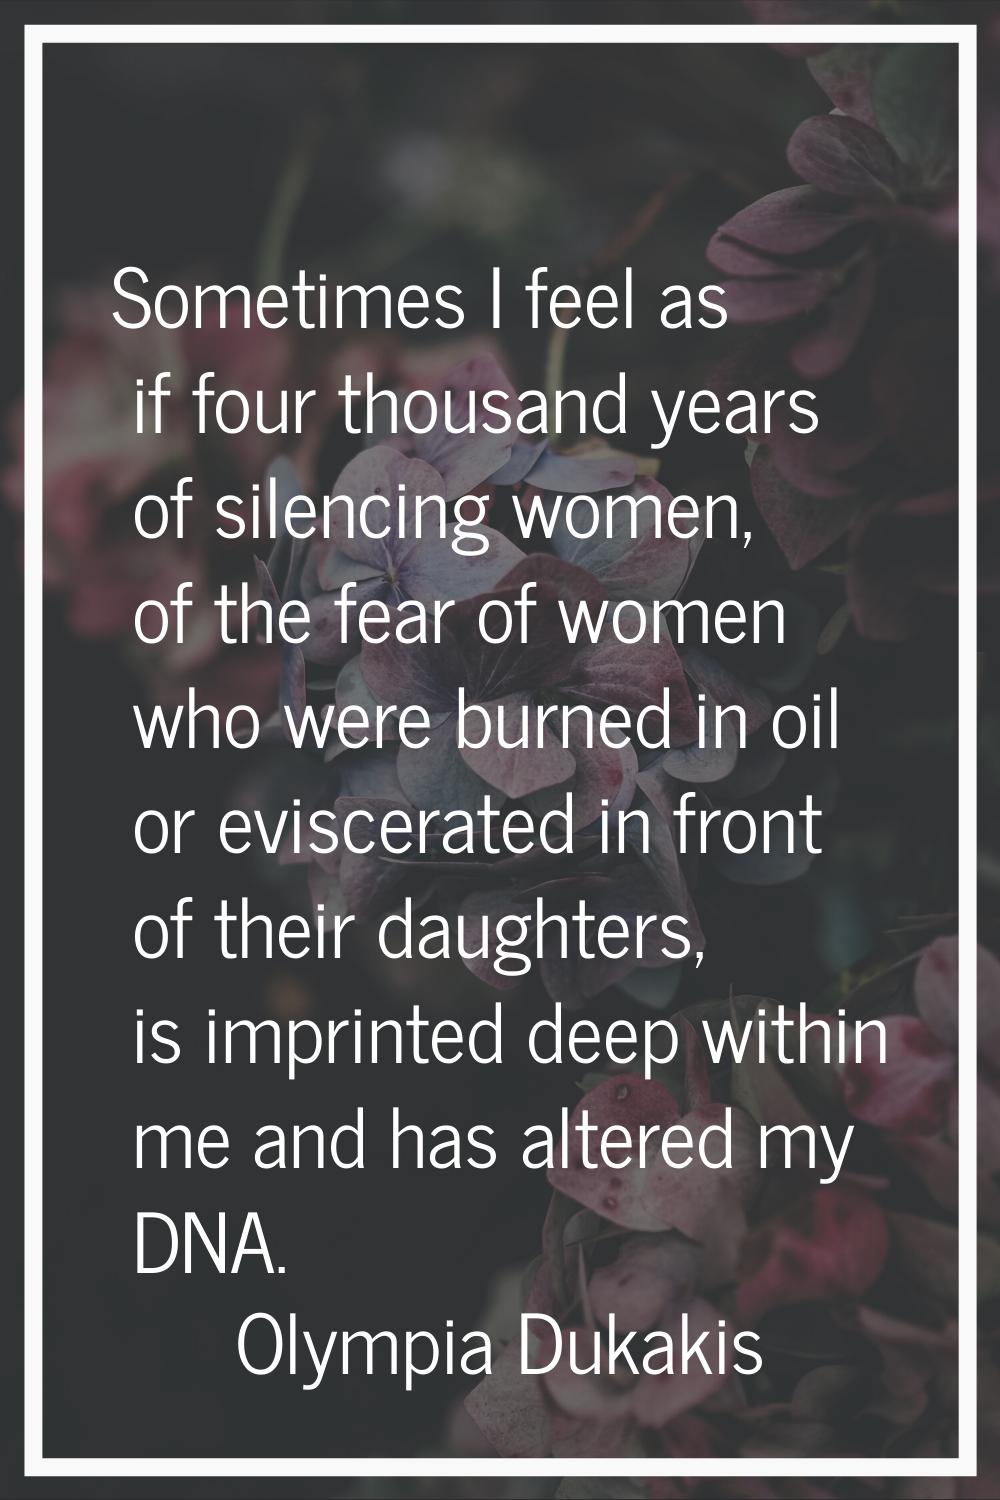 Sometimes I feel as if four thousand years of silencing women, of the fear of women who were burned